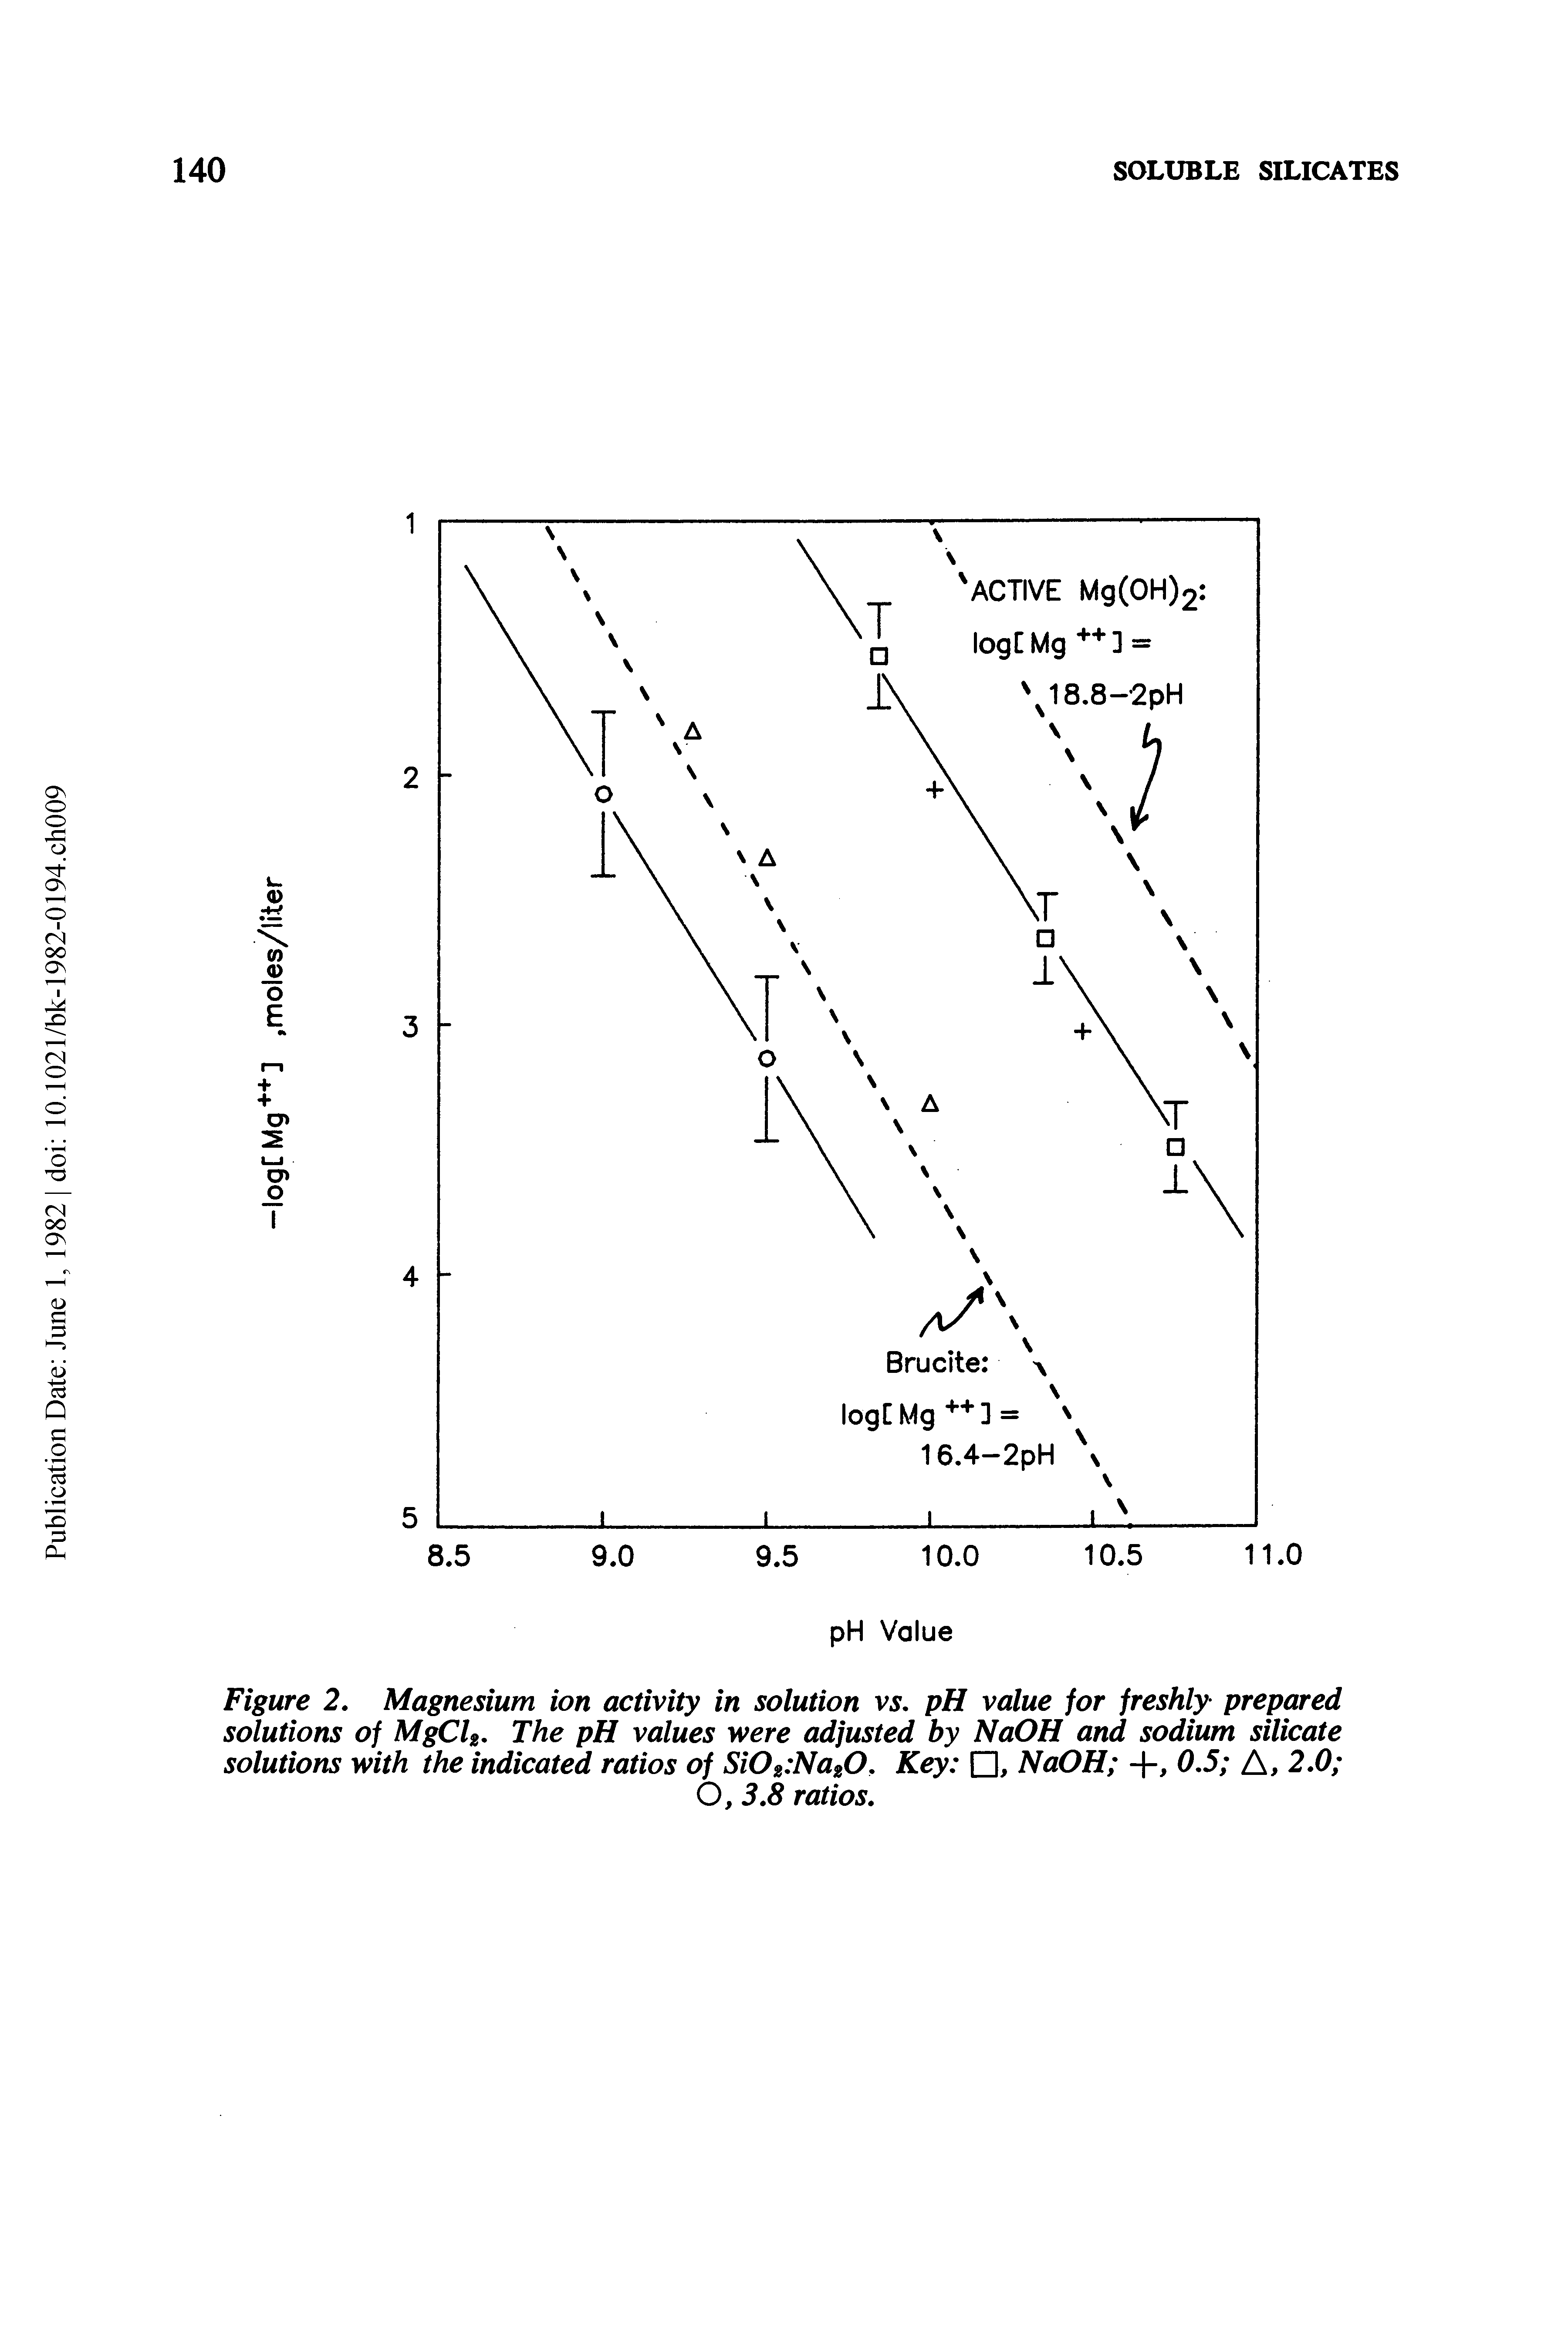 Figure 2, Magnesium ion activity in solution vs. pH value for freshly prepared solutions of MgCU. The pH values were adjusted by NaOH and sodium silicate solutions with the indicated ratios of Si02 Na20, Key , NaOH +, 0.5 A, 2.0 ...